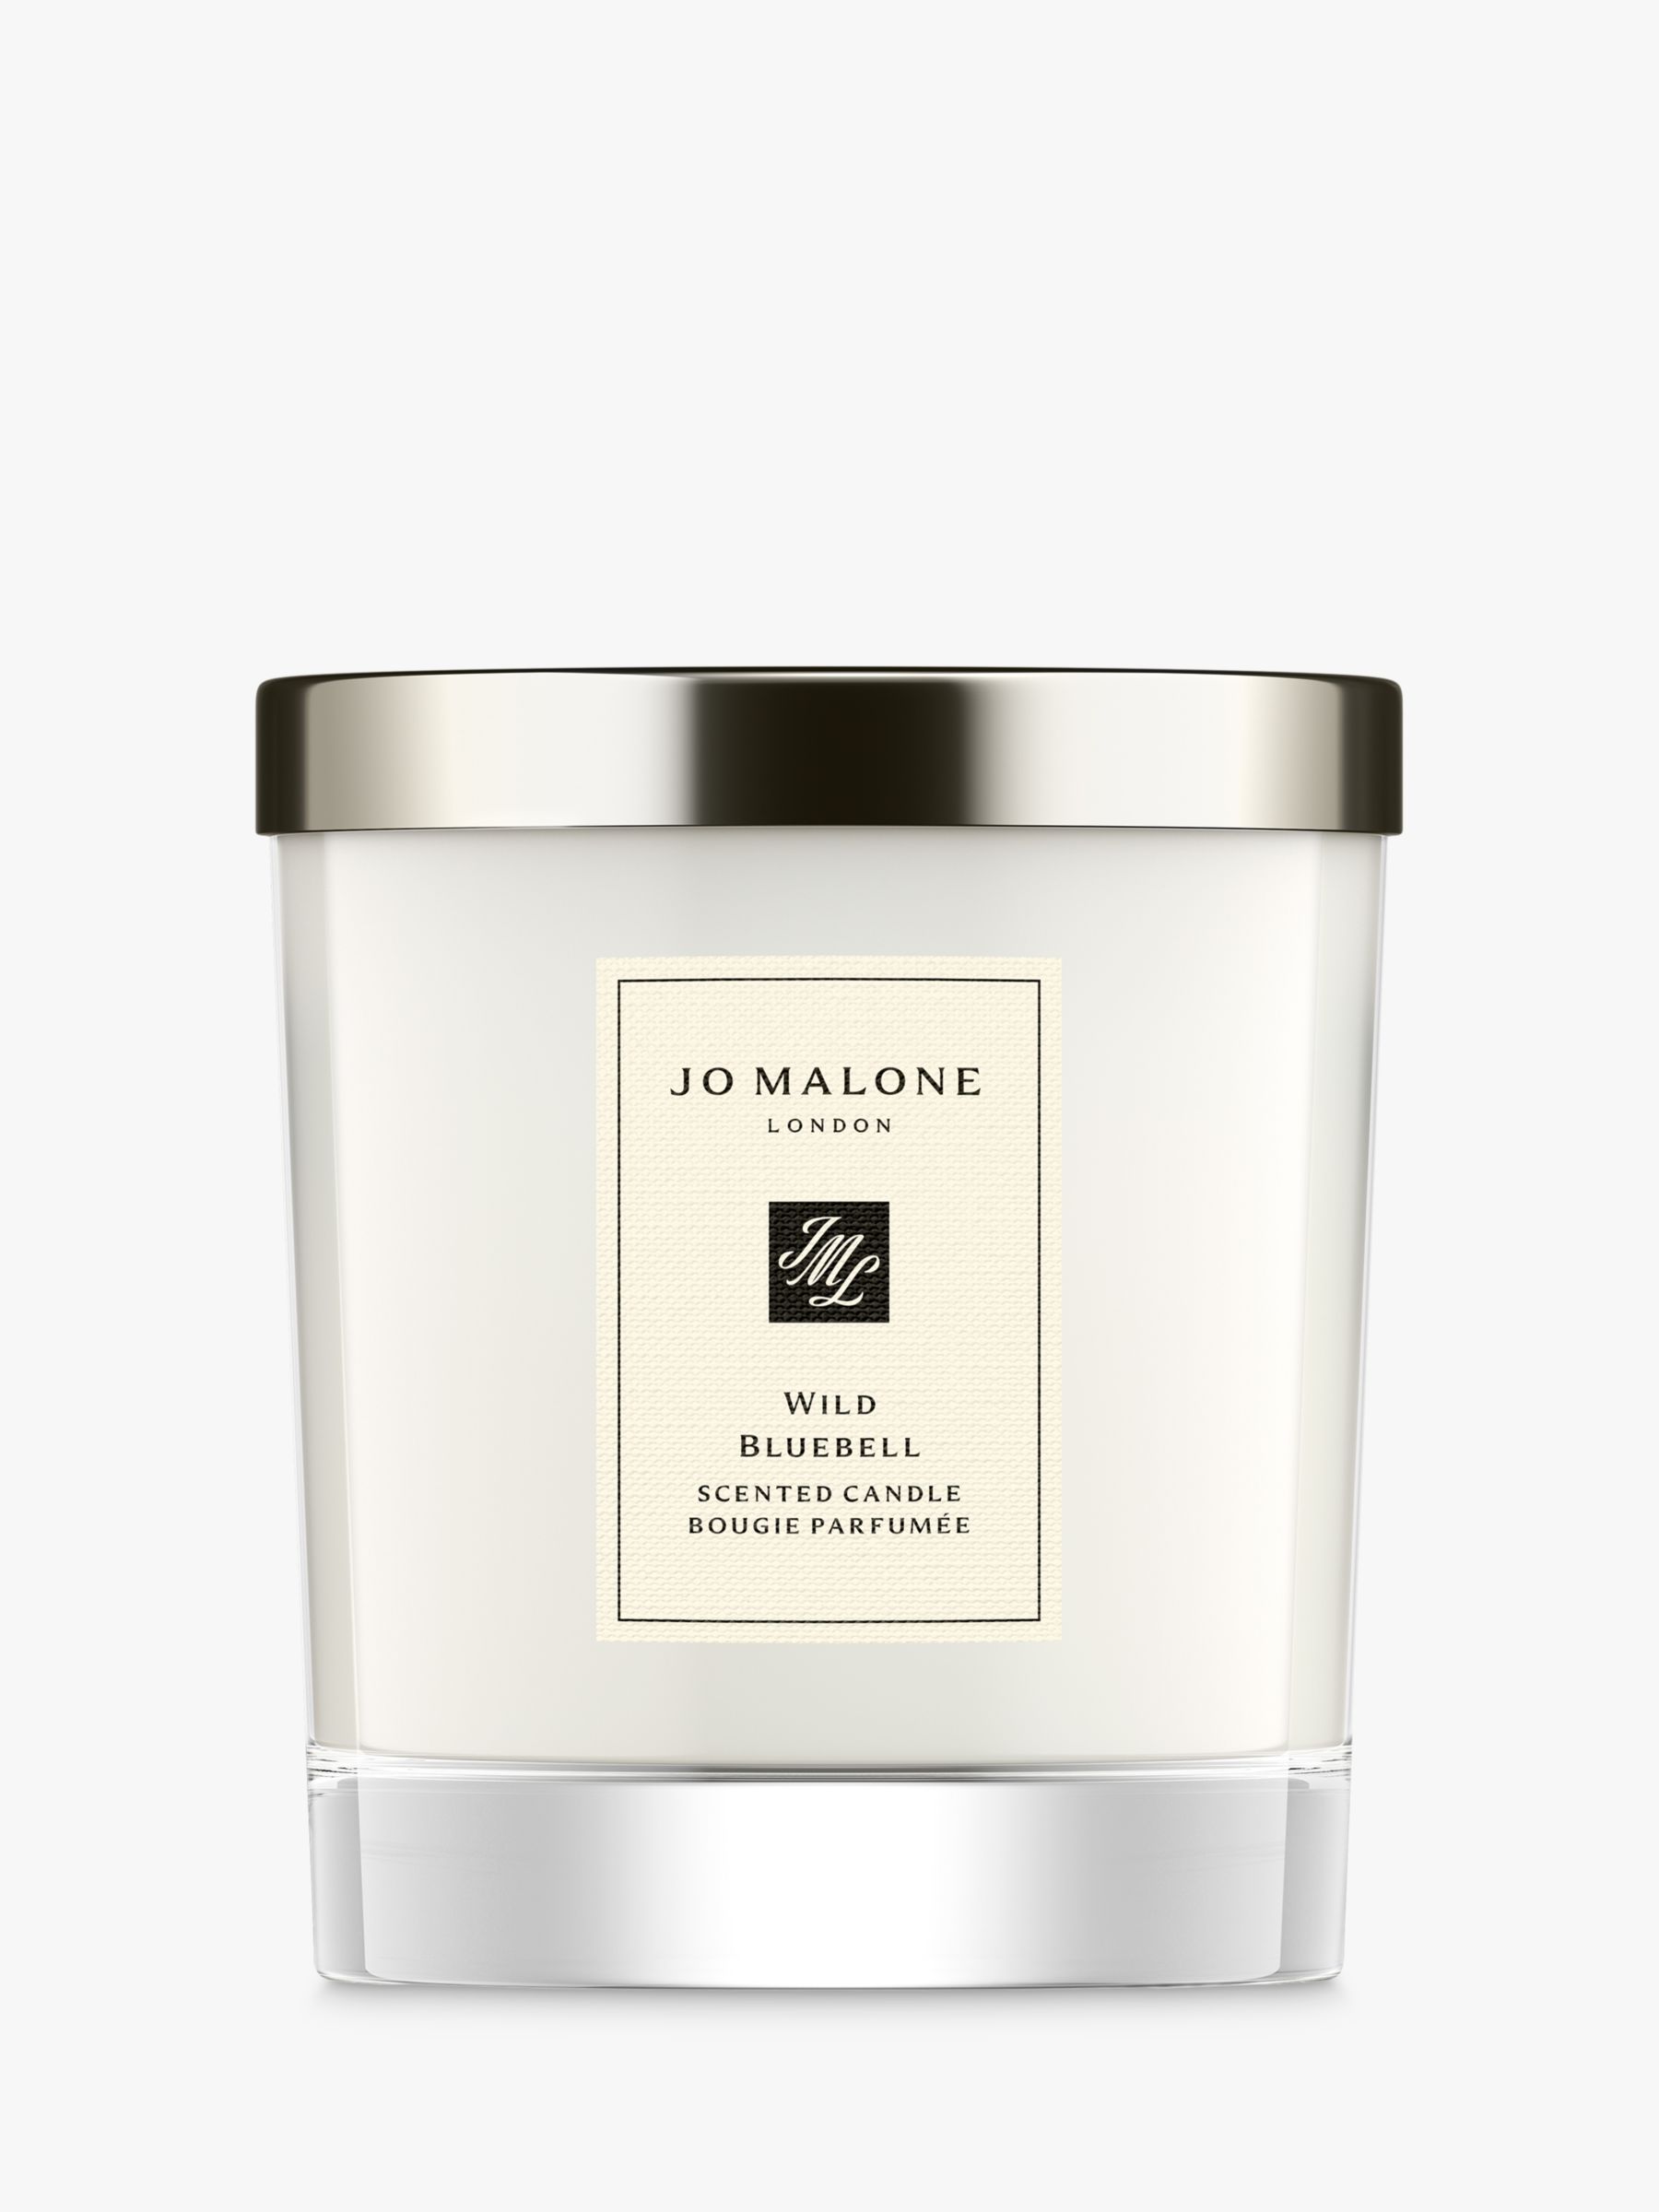 Jo Malone London Wild Bluebell Scented Home Candle, 200g at John Lewis ...